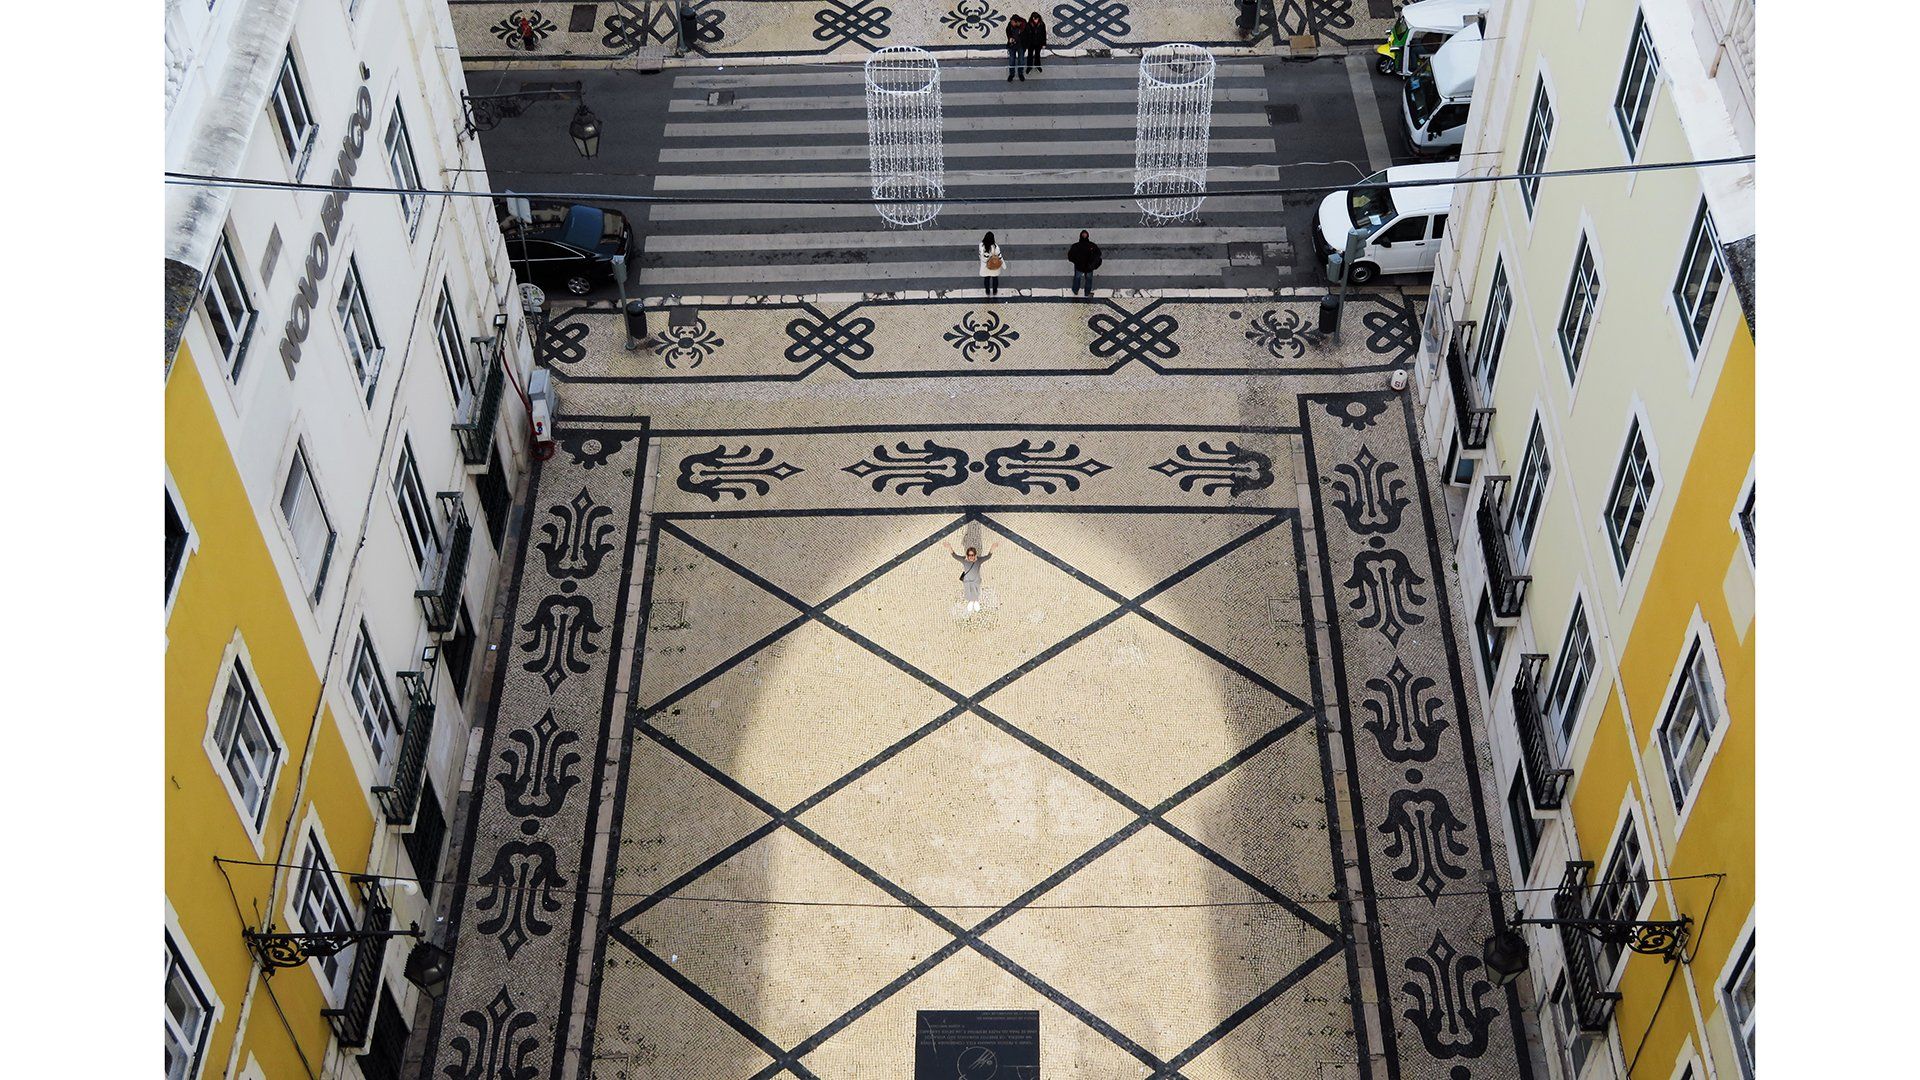 A shot taken from the top of a high building shows a pretty old courtyard with patterned tiled floors and a staircase. On the left and right are yellow and white building fronts.